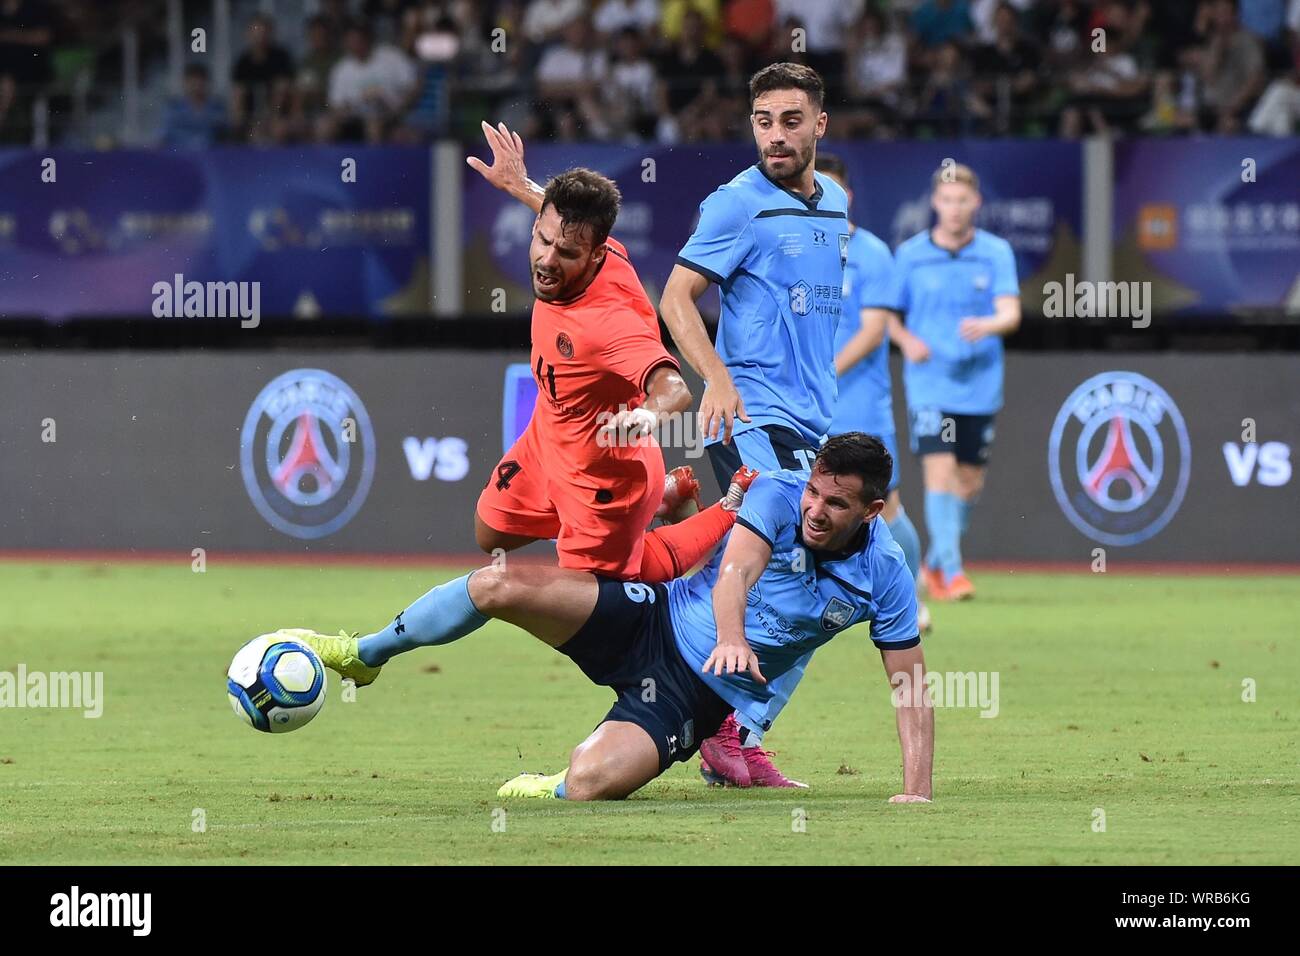 Juan Bernat, left, of Paris Saint-Germain is fouled by Ryan McGowan of Sydney FC during their match of the International Super Cup 2019 in Suzhou City Stock Photo